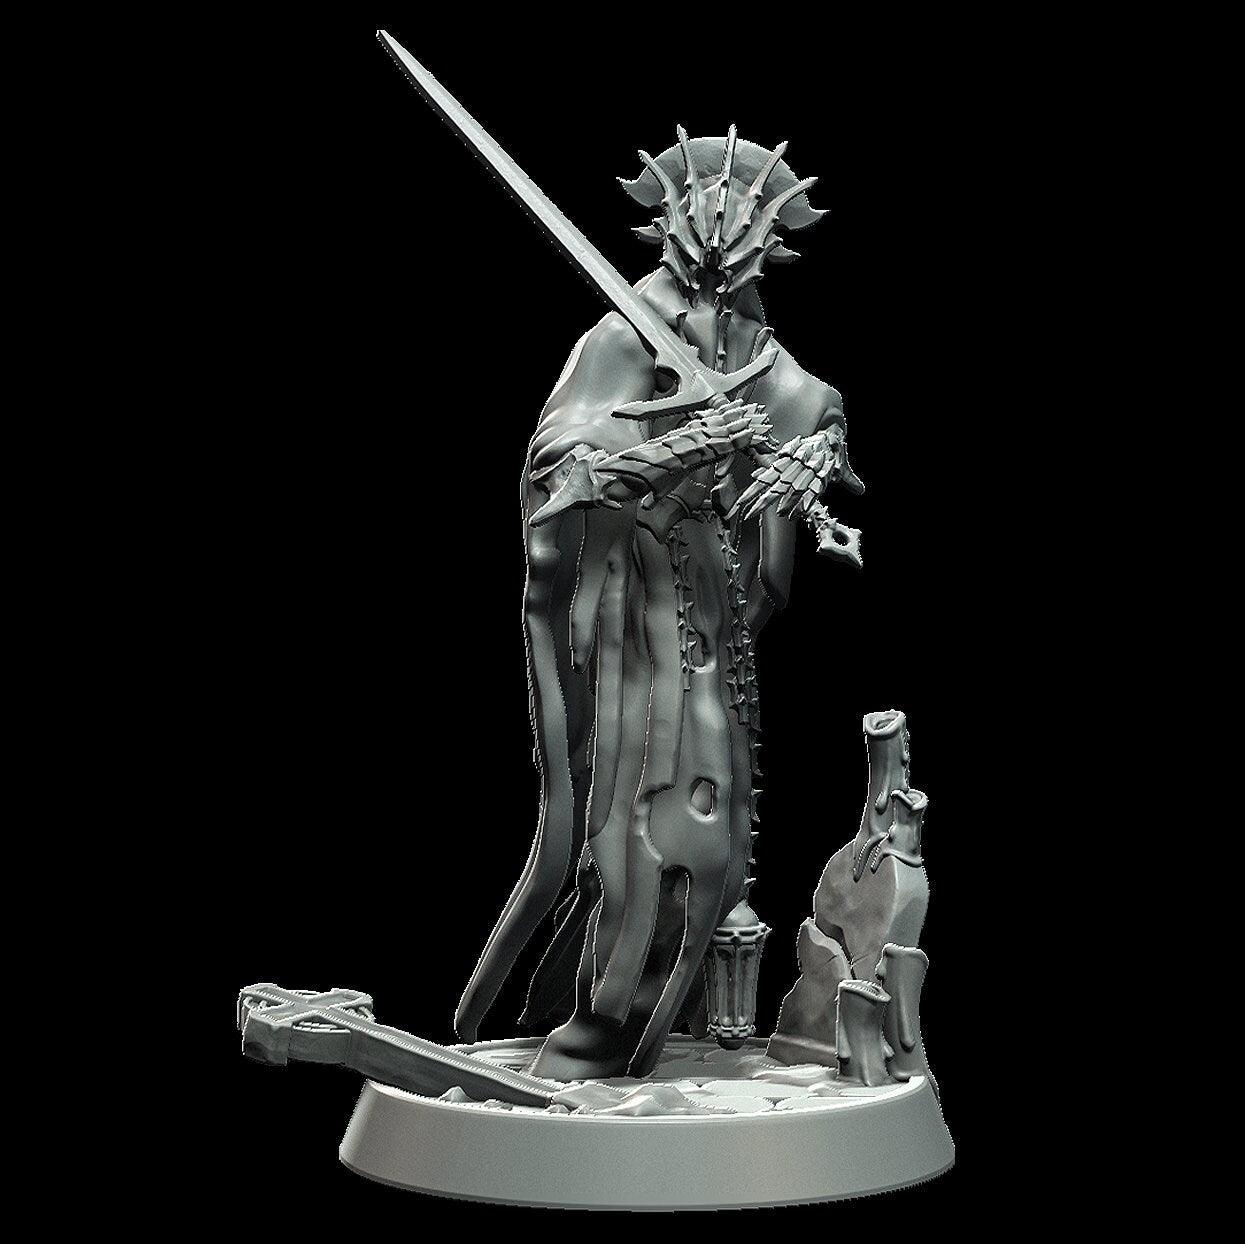 Restless Shadow Miniature - 3 Poses - 28mm scale Tabletop gaming DnD Miniature Dungeons and Dragons,ttrpg dnd 5e - Plague Miniatures shop for DnD Miniatures